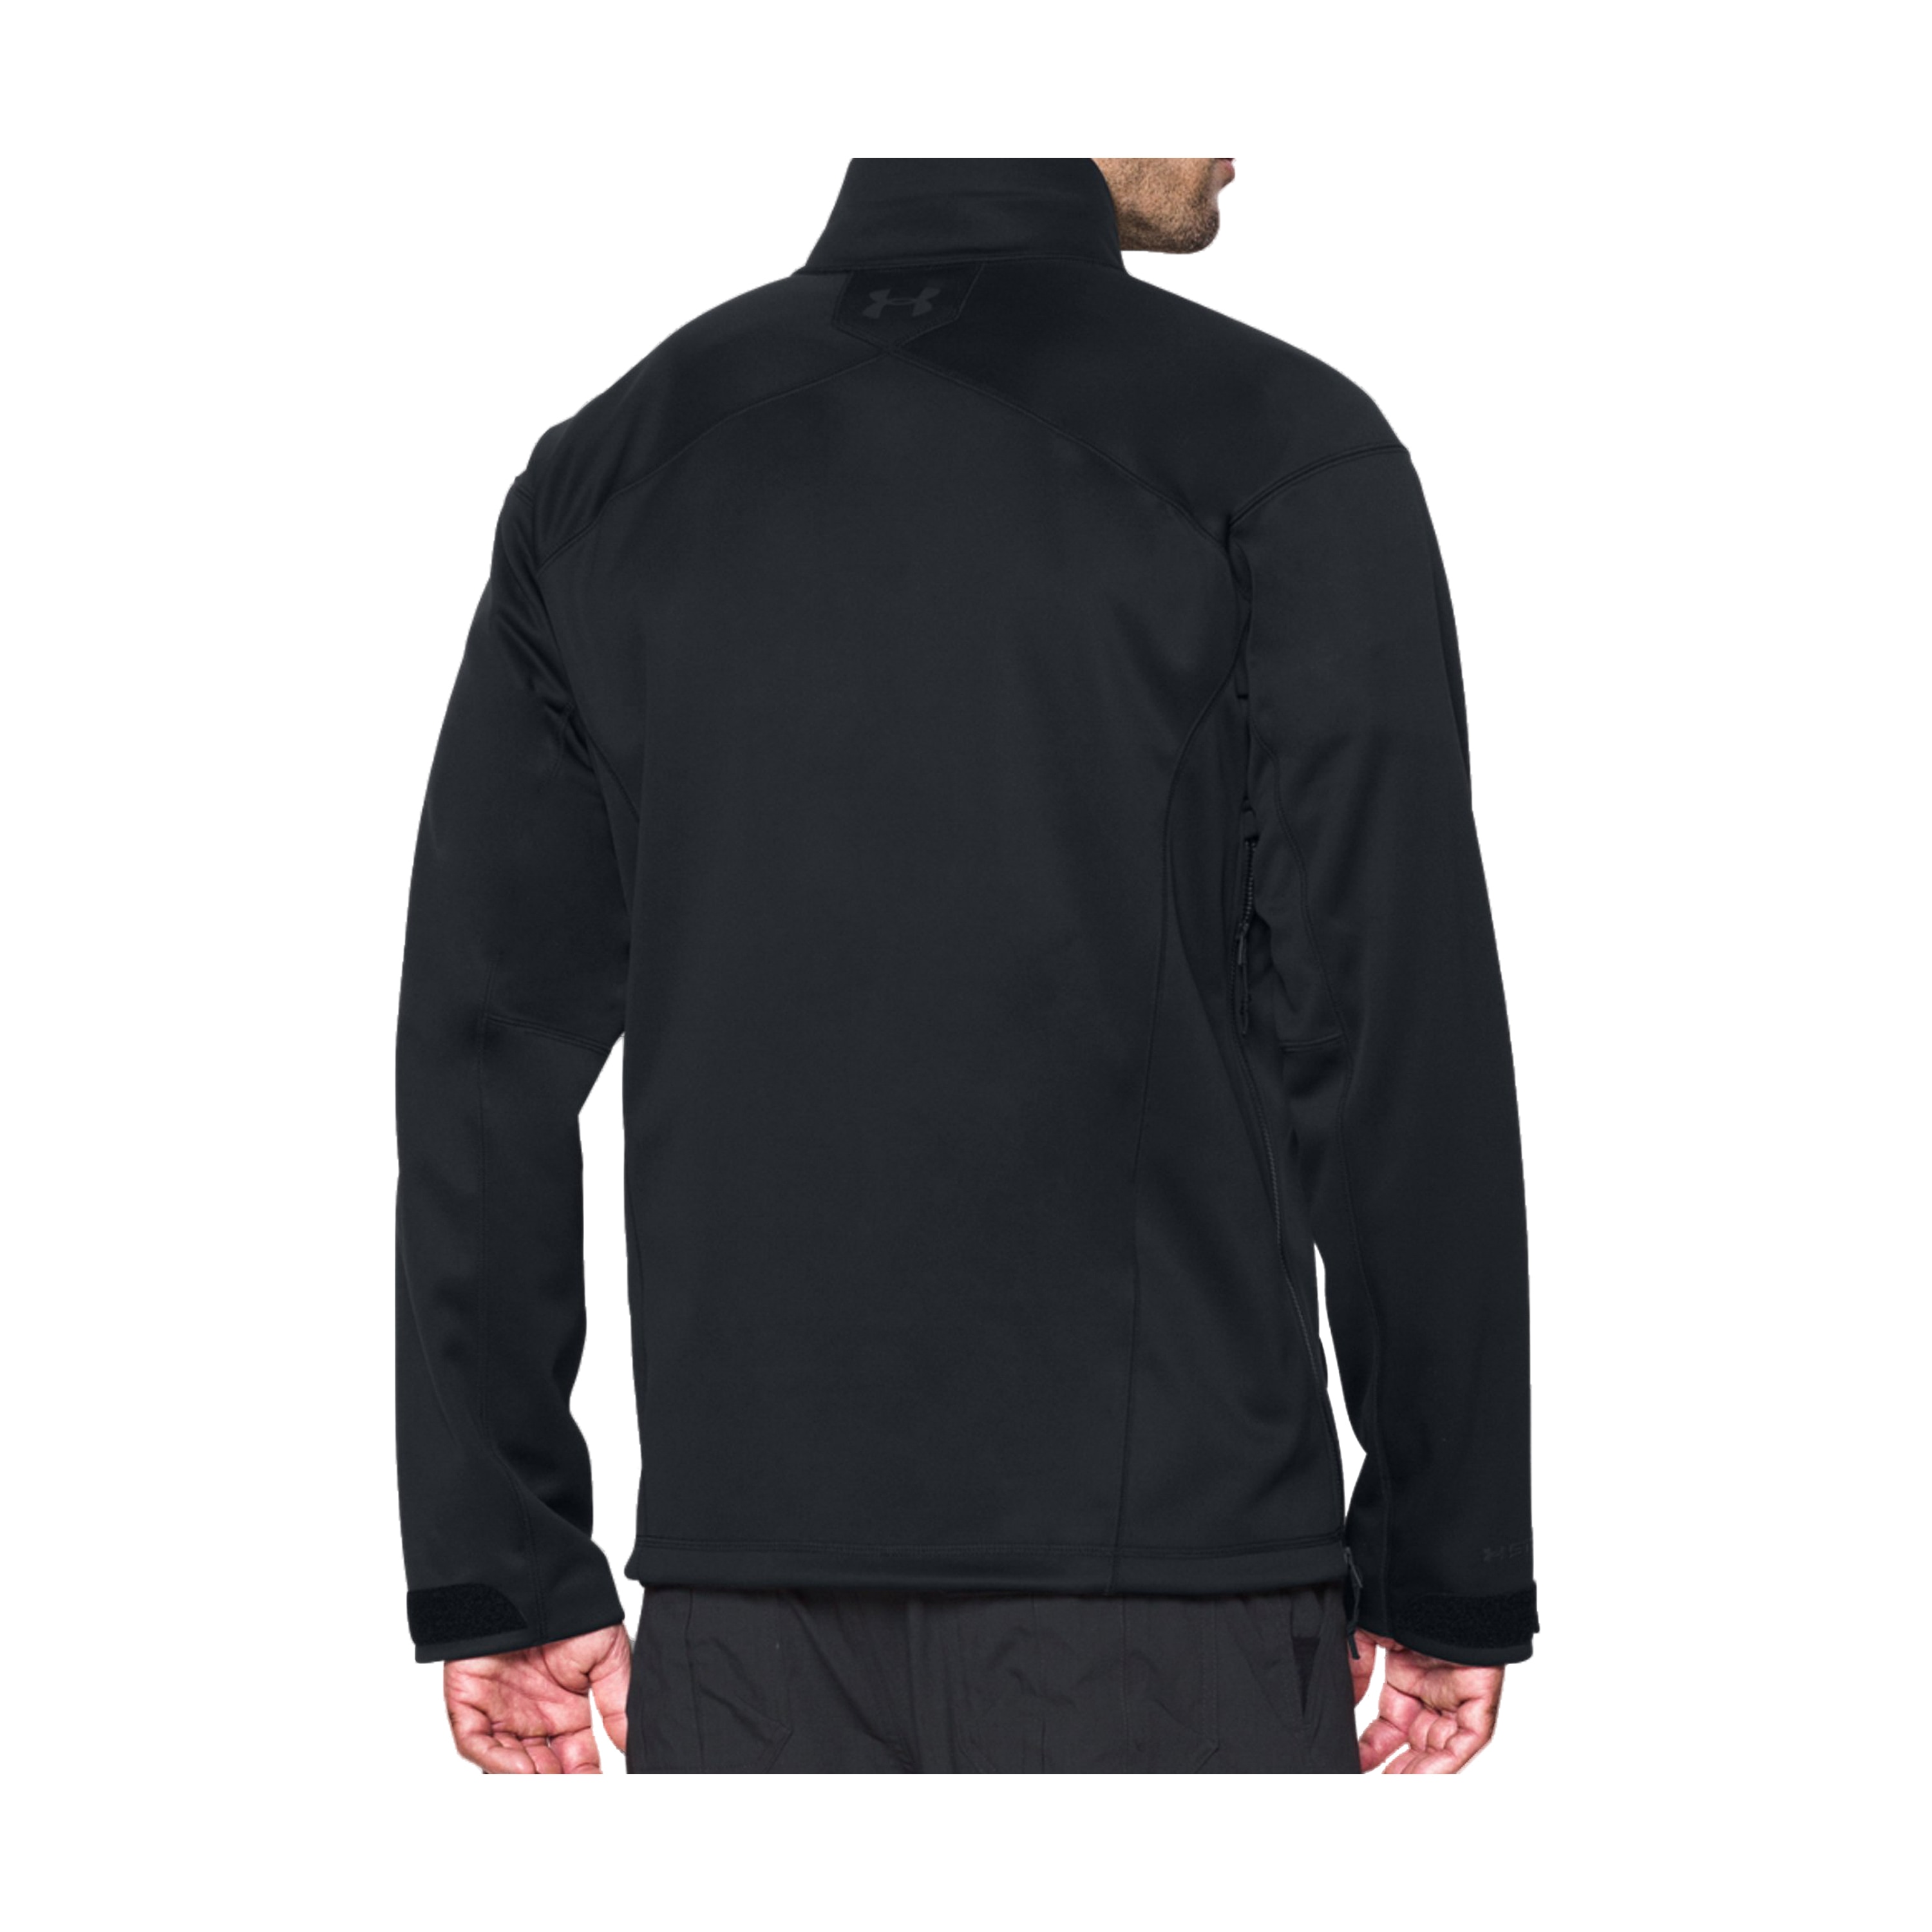 Purchase the Under Armour Tactical Jacket Duty black by ASMC